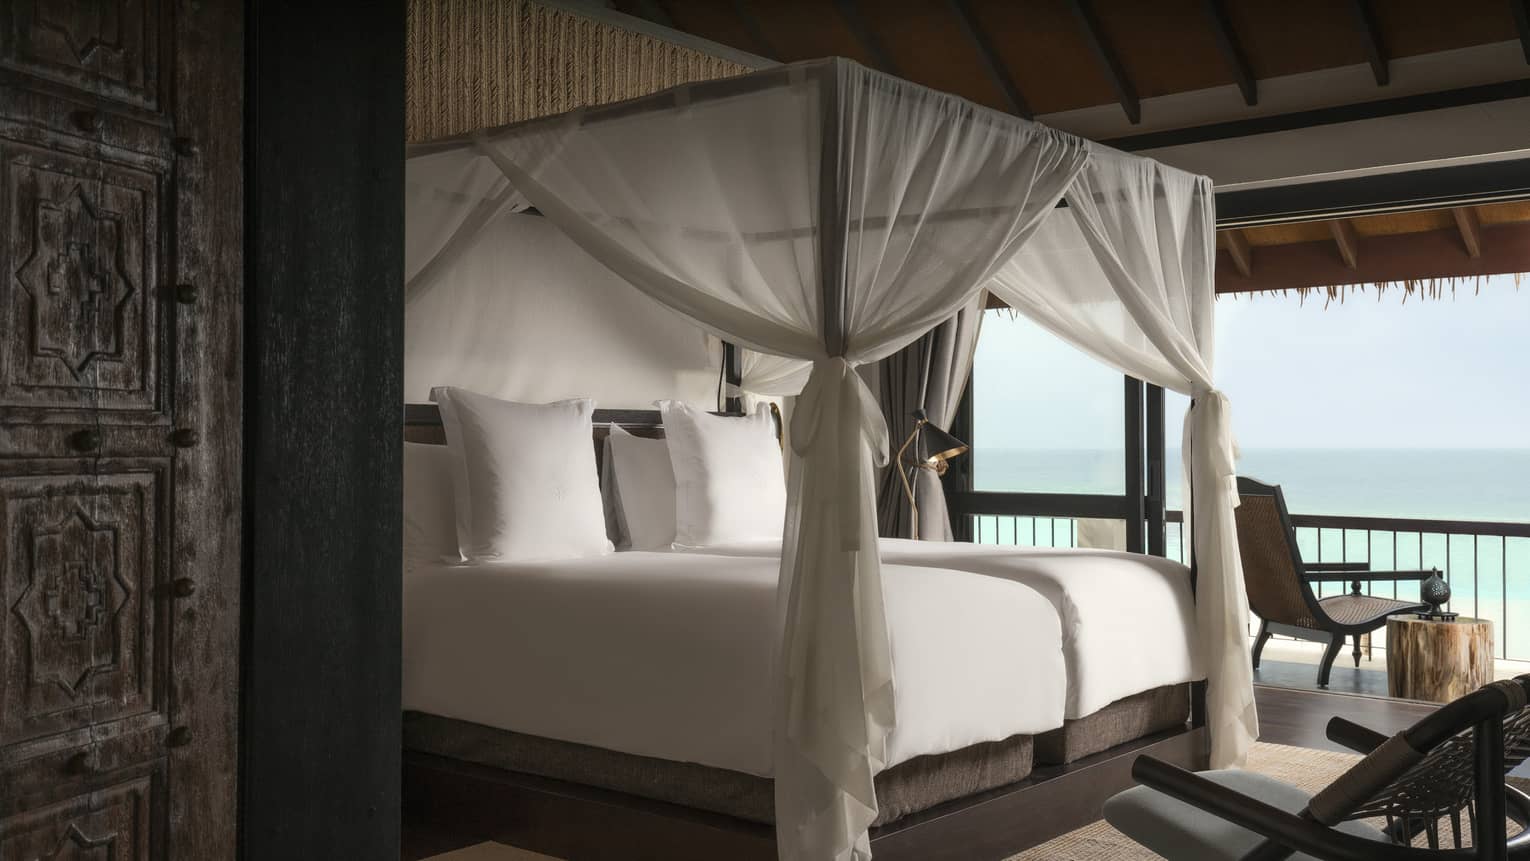 Villa poster bed with white canopy by open wall with ocean views